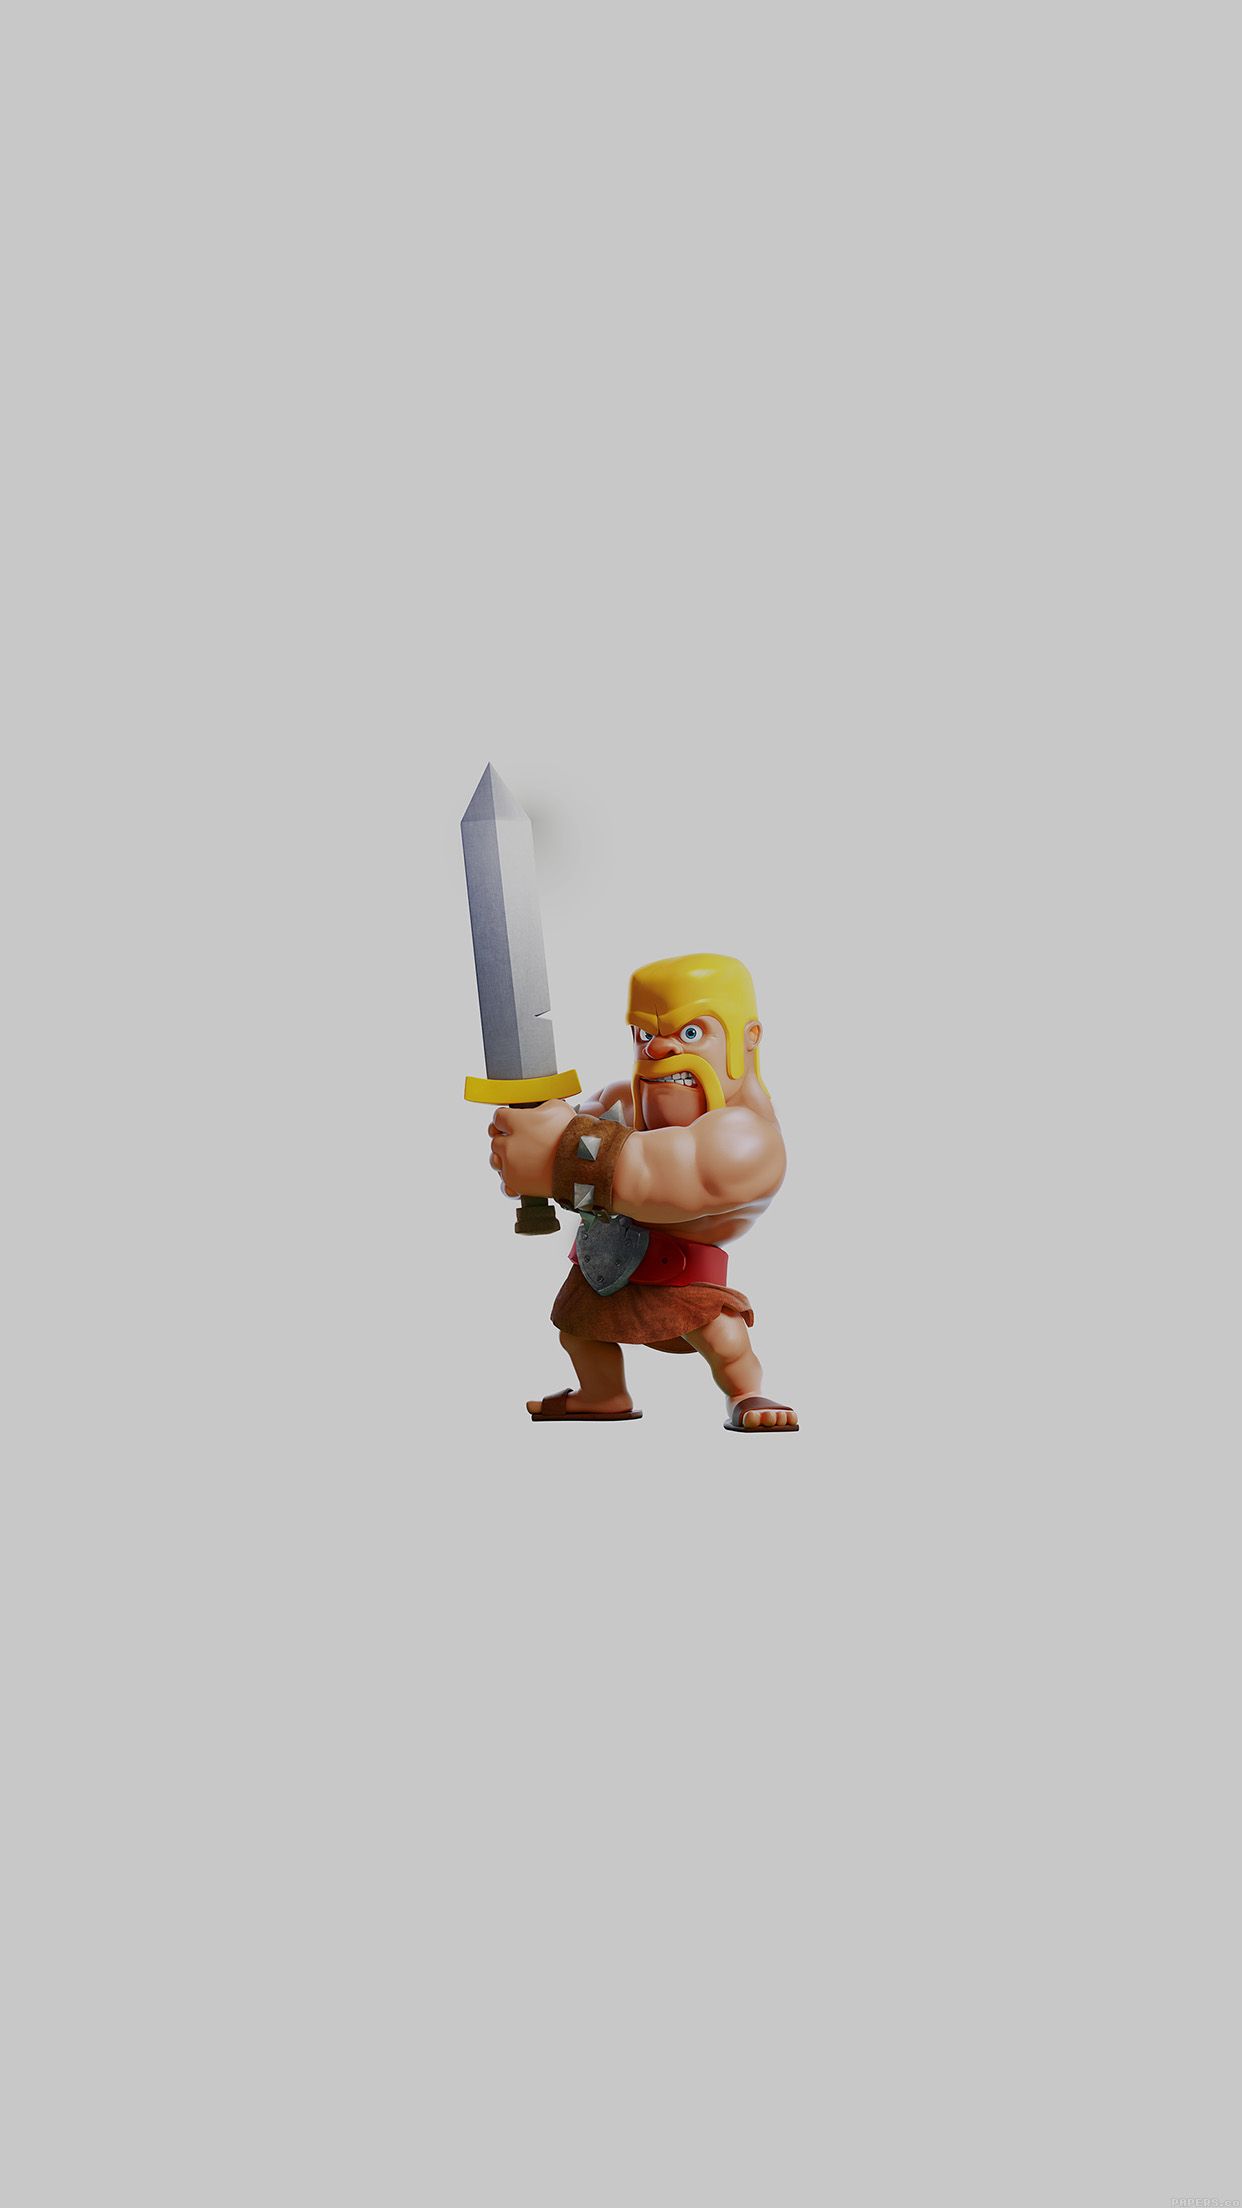 Barbarian Clash Of Clans Art Dark Gameiphone7papers.com